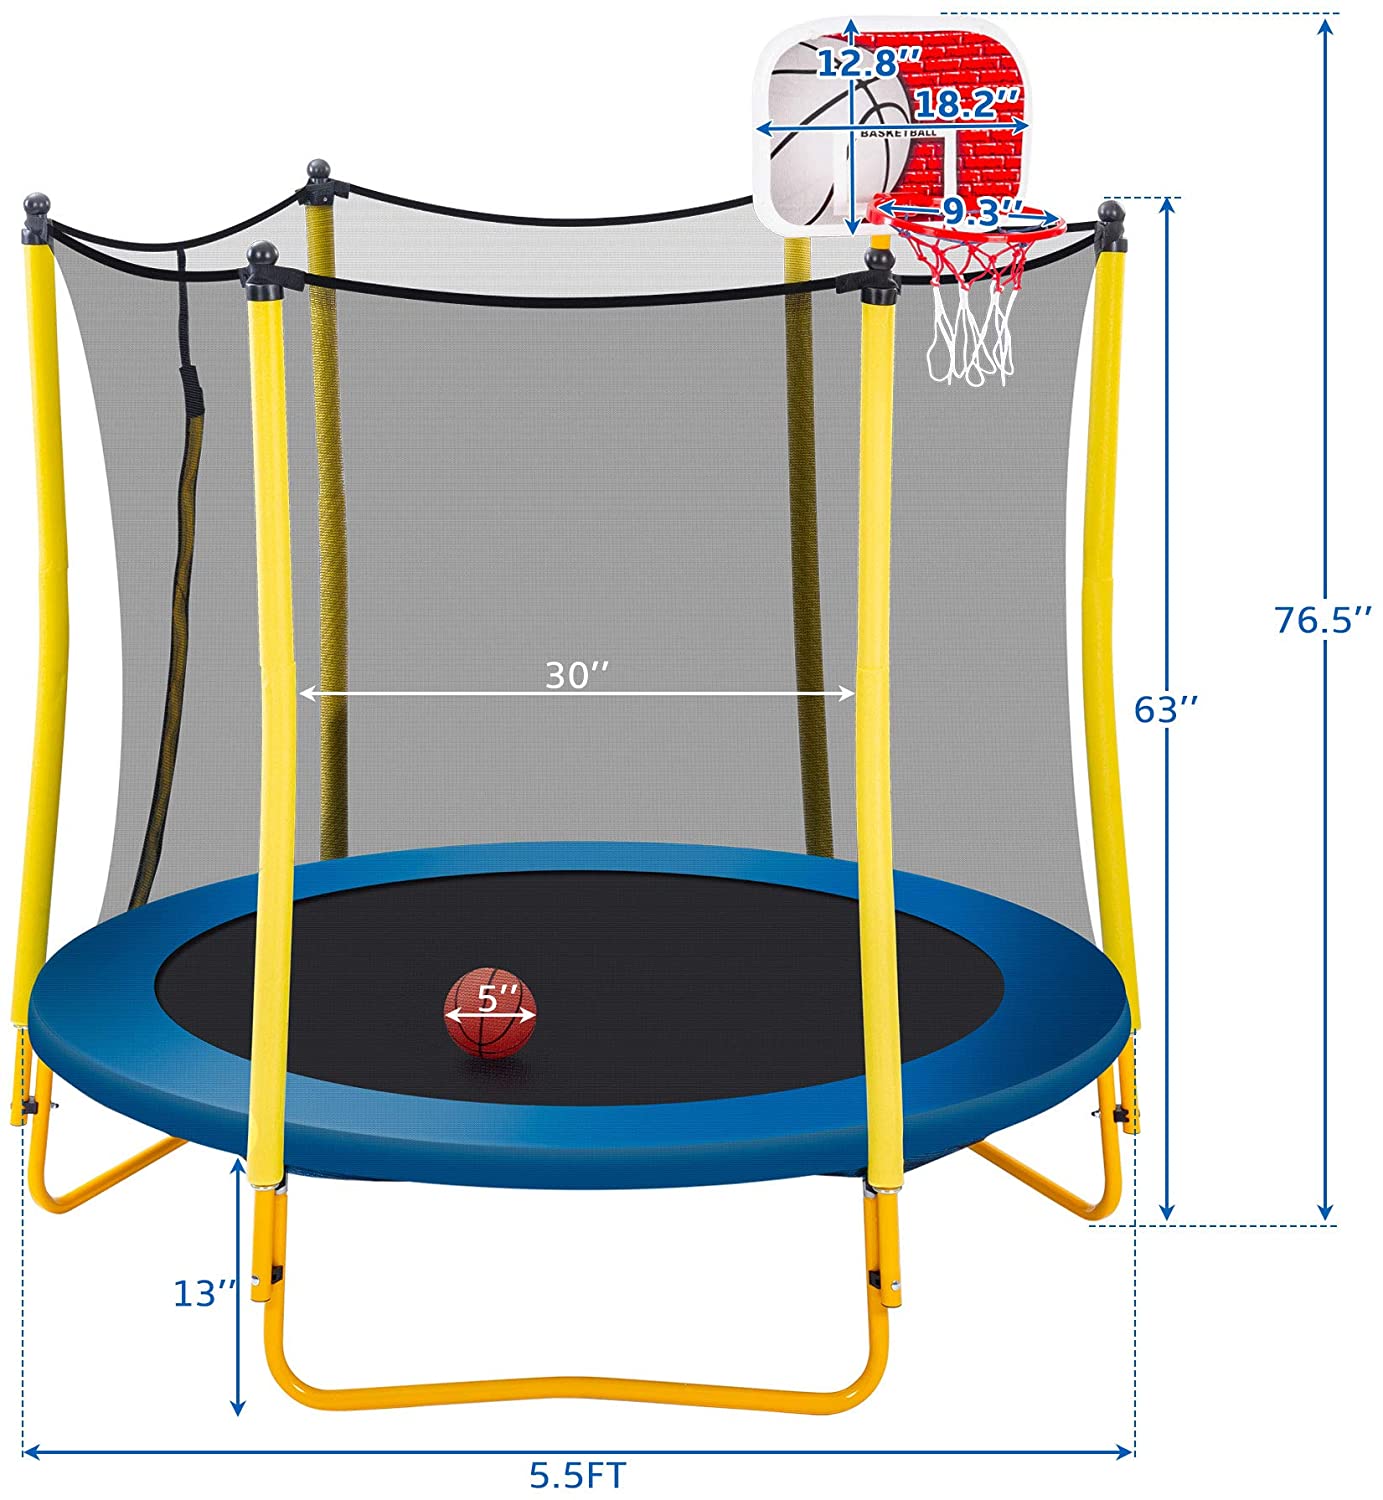 Trampoline for Kids with Basketball Hoop, Rubber Ball and Safety Enclosure Net